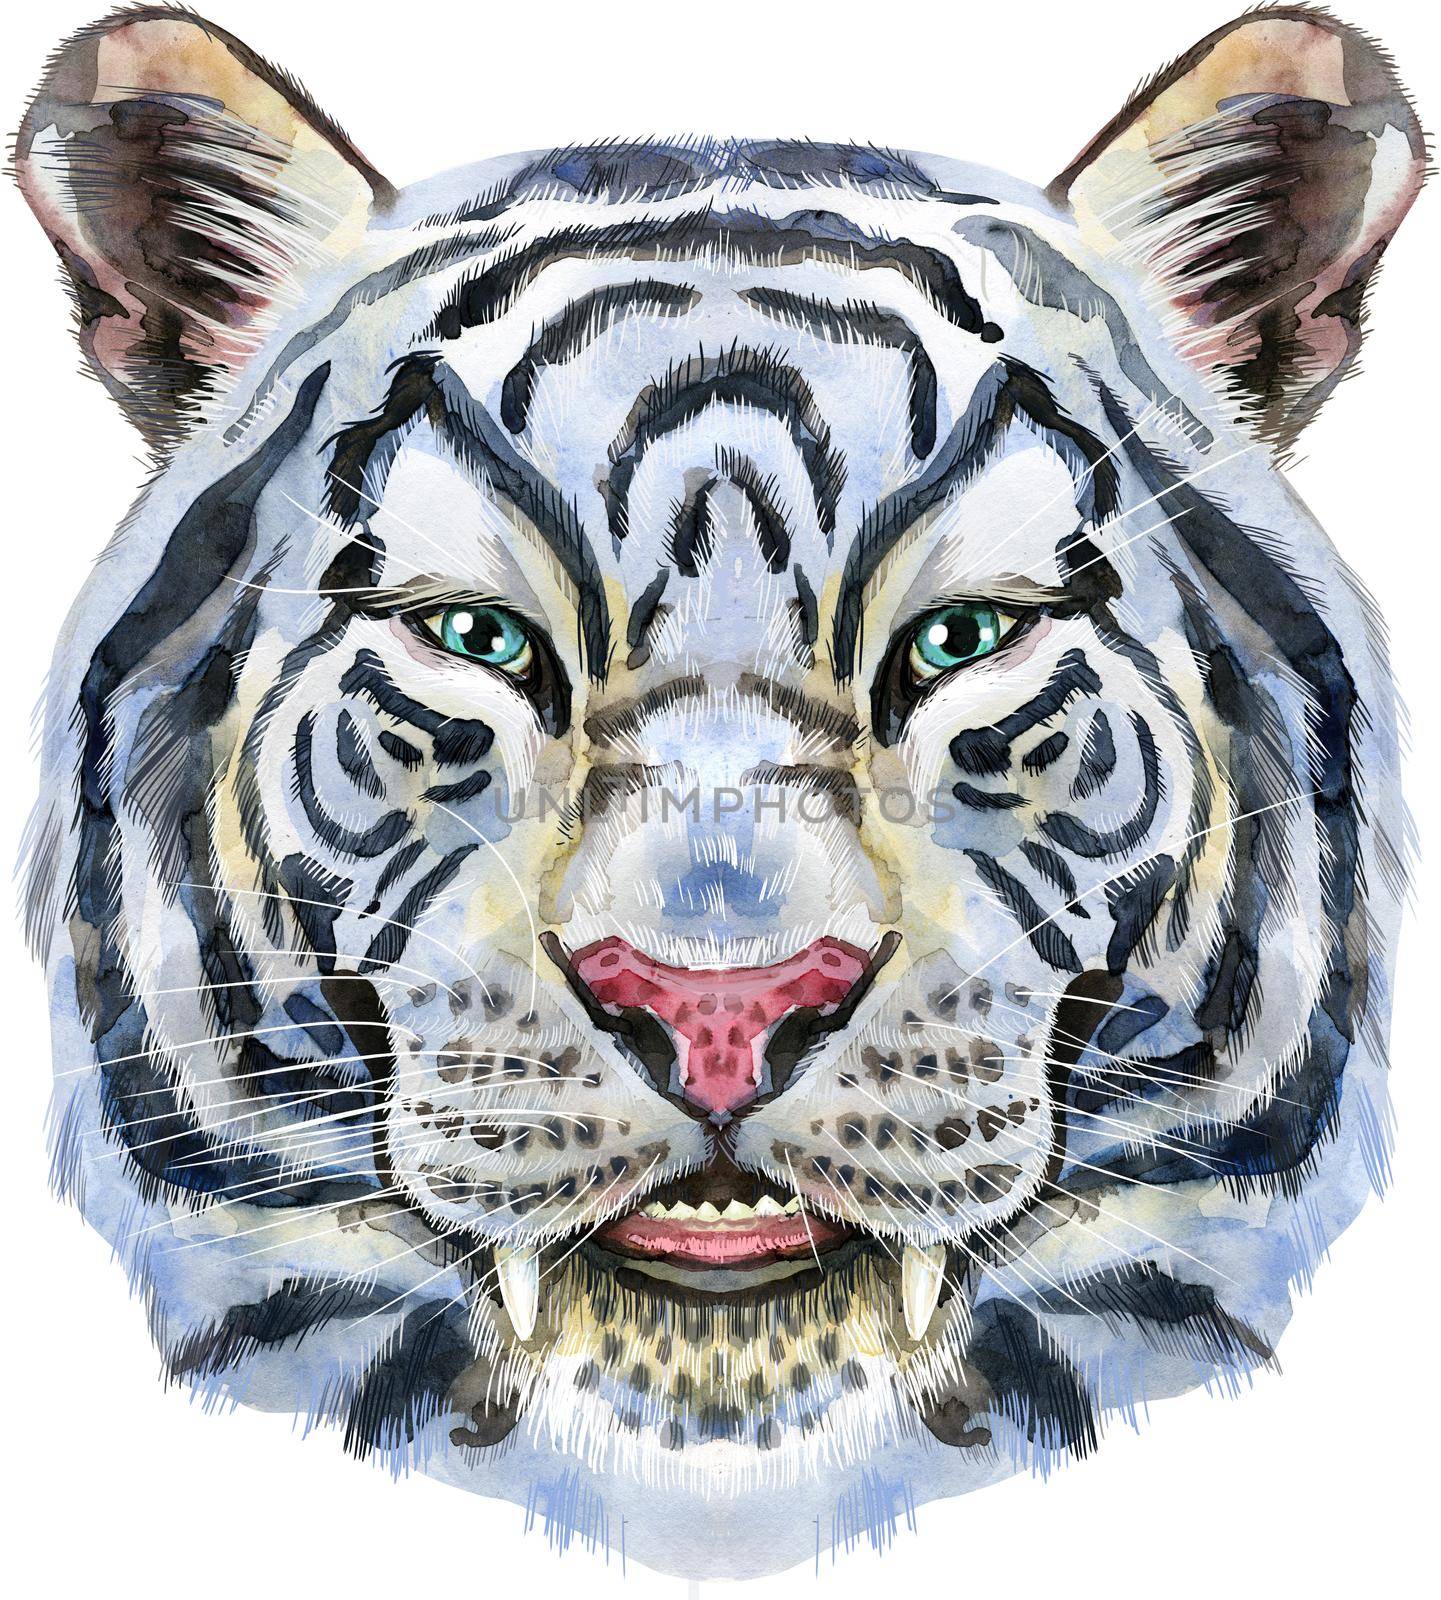 Watercolor illustration of white smiling tiger